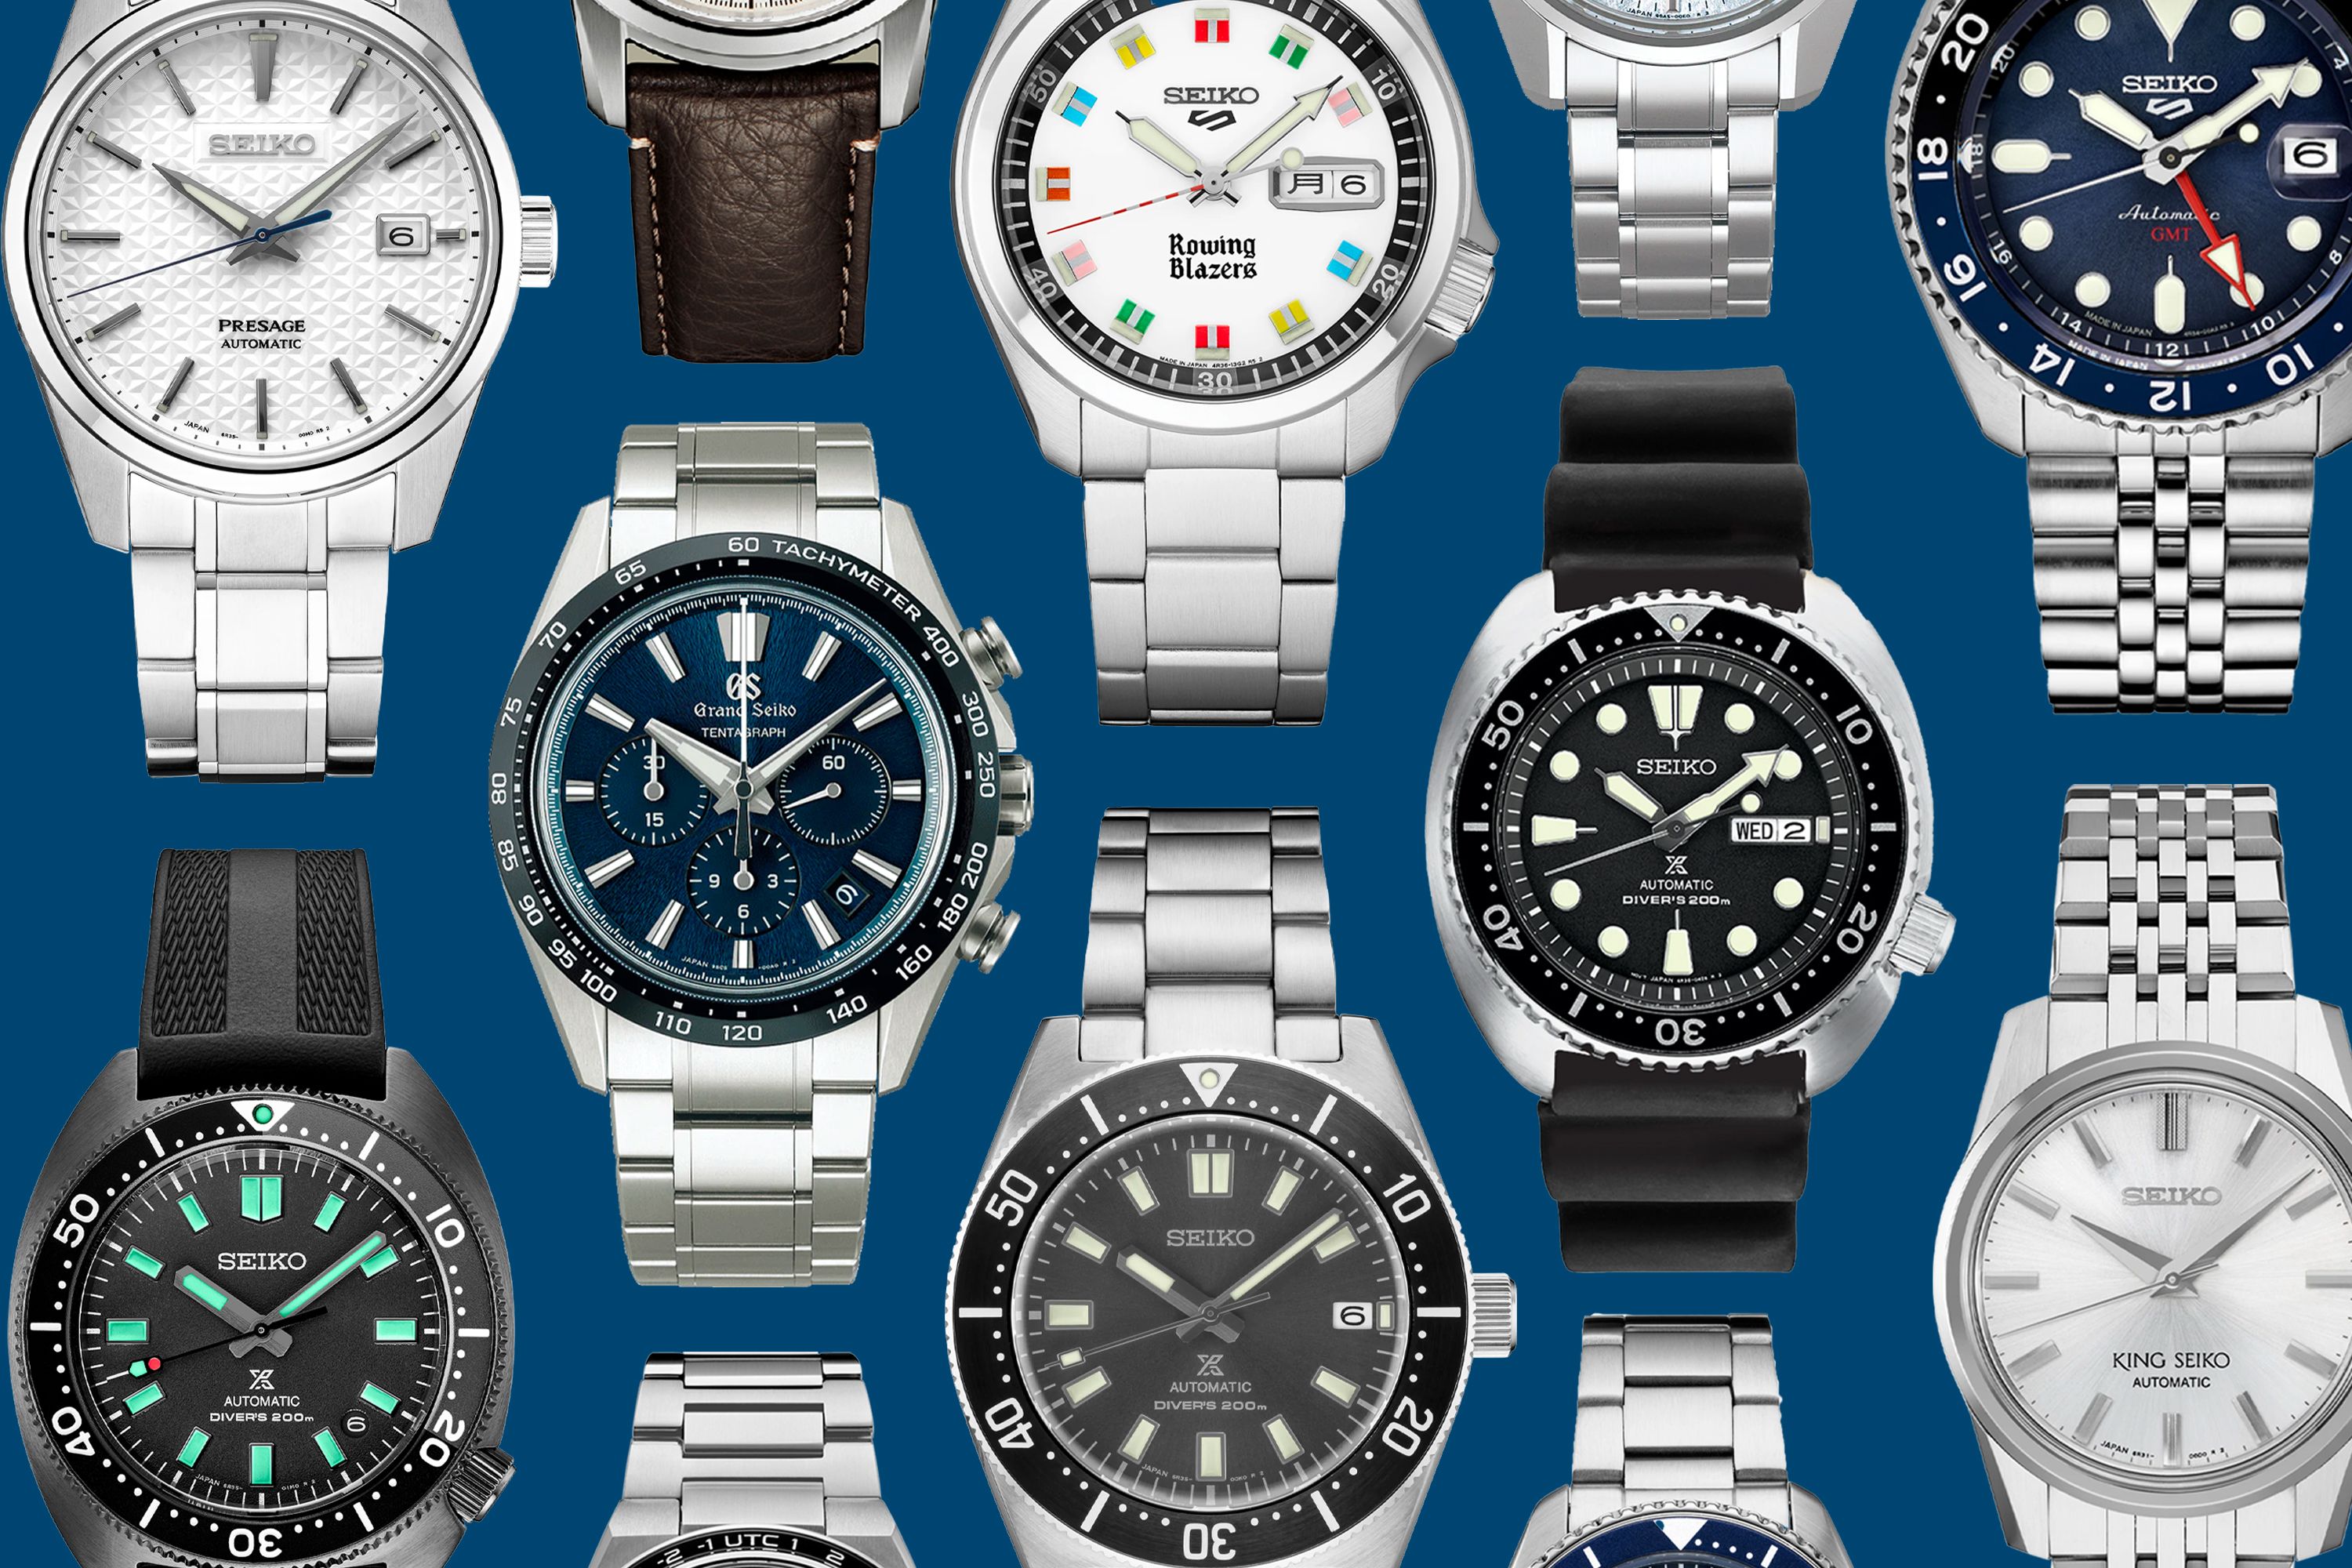 gå på pension Niende beholder A Guide to Every Single Seiko Watch You Can Buy